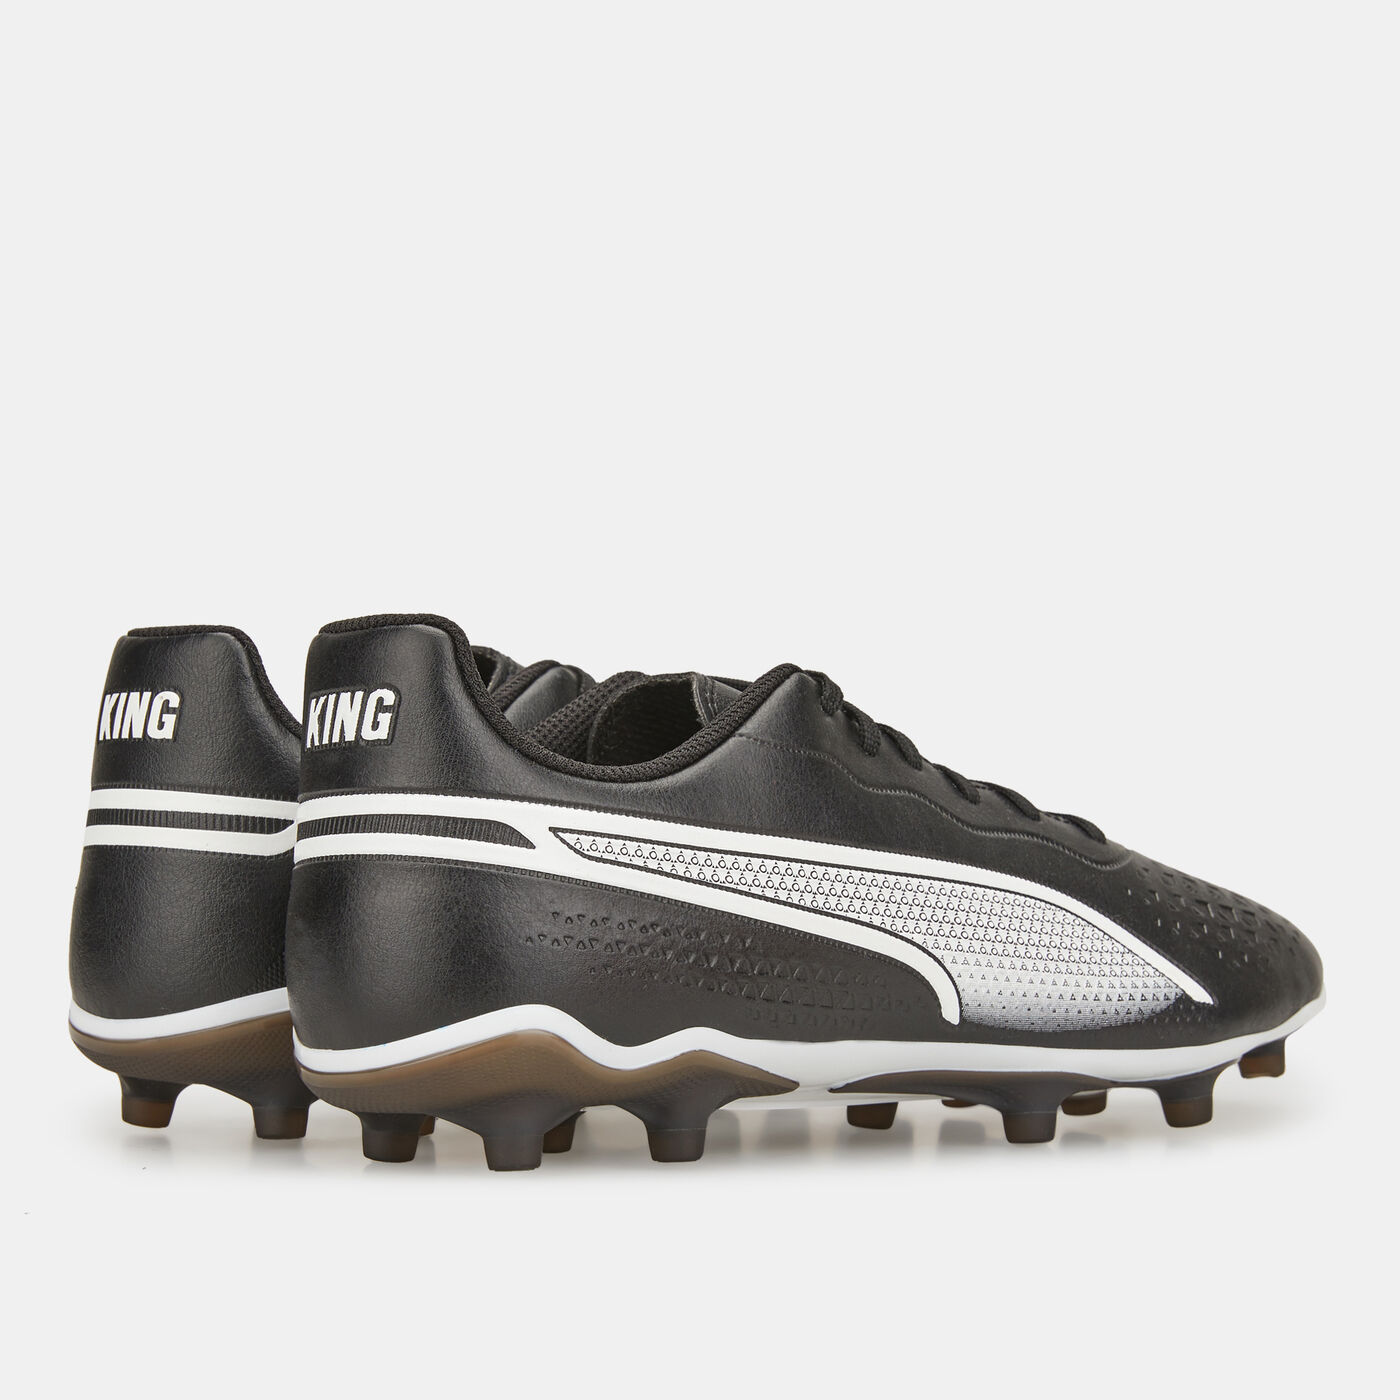 Men's King Match Firm Ground/Artificial Ground Football Shoes